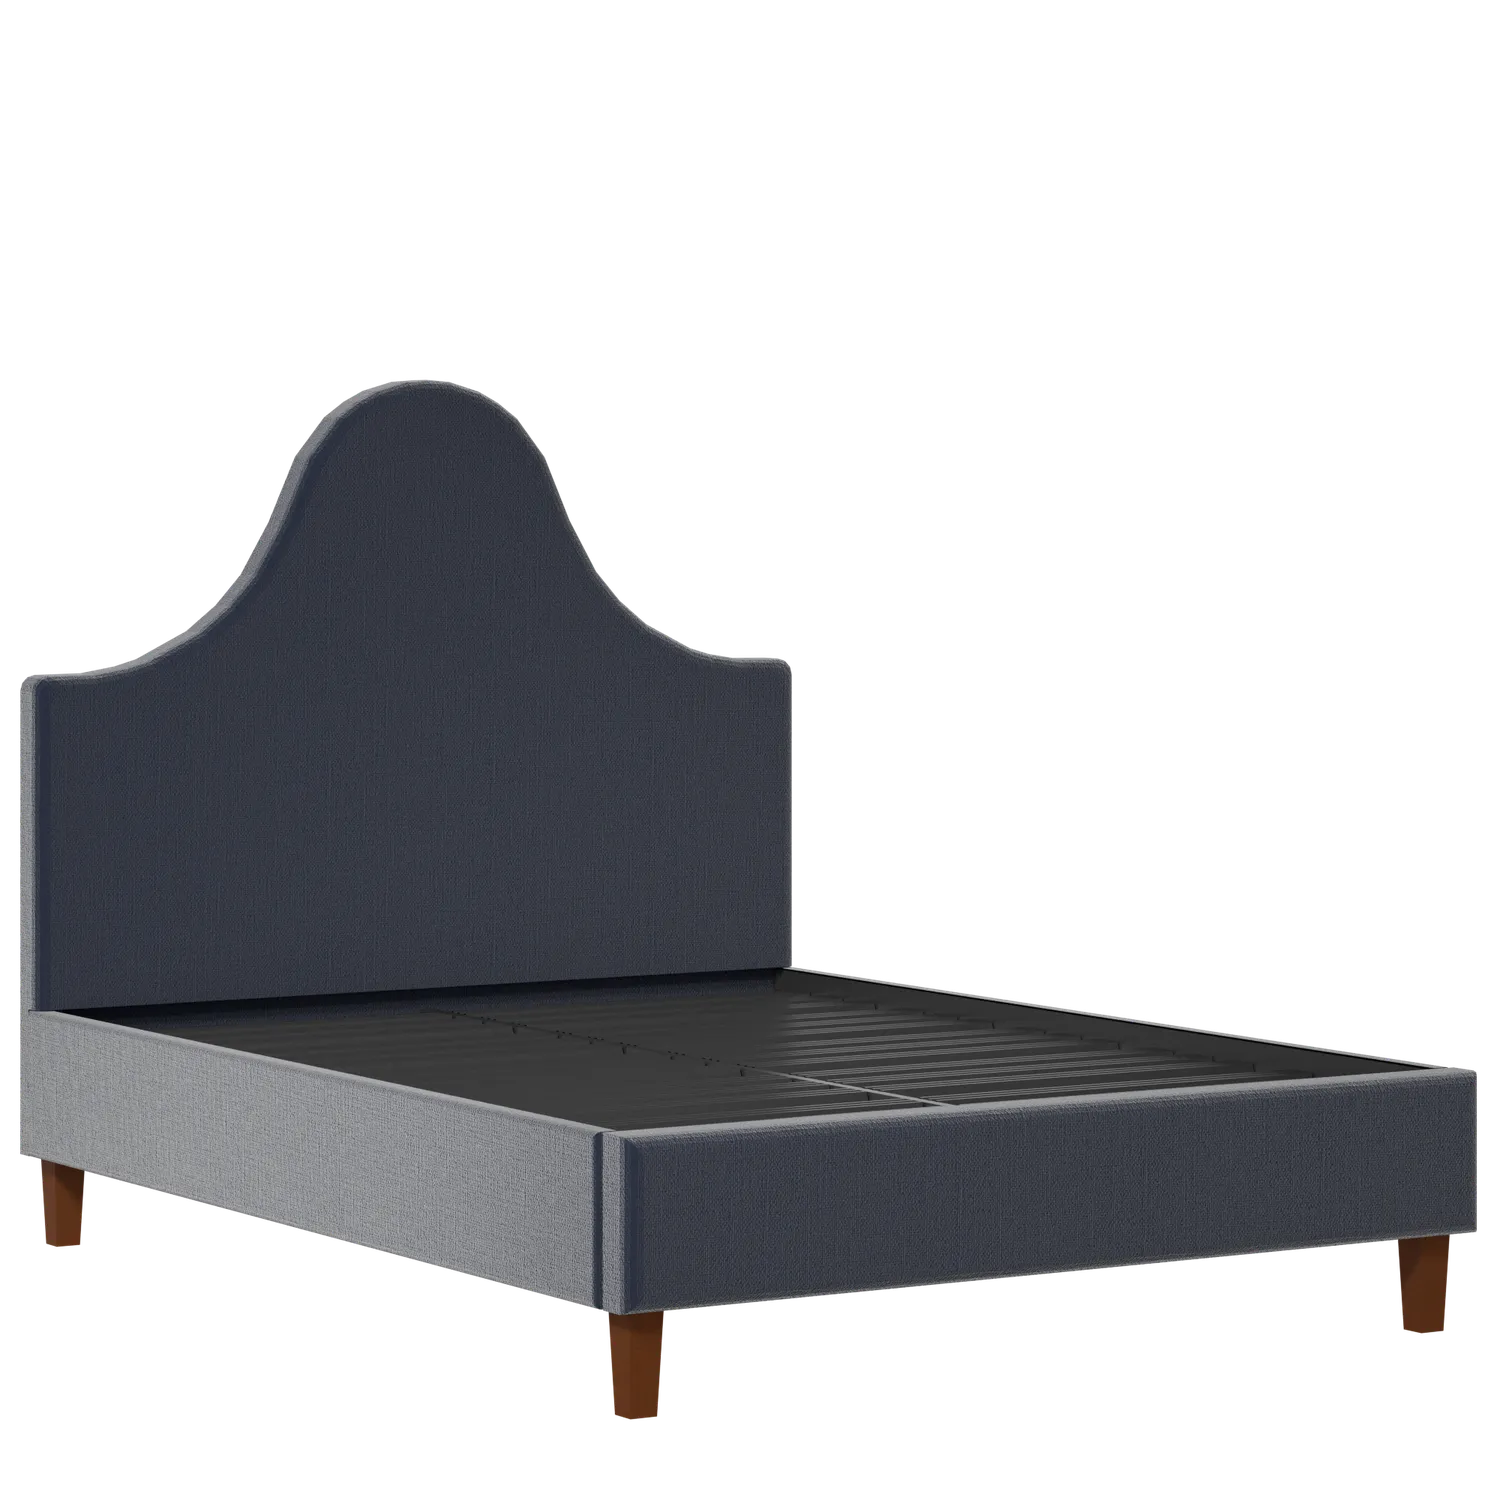 Beverley upholstered bed in oxford blue fabric